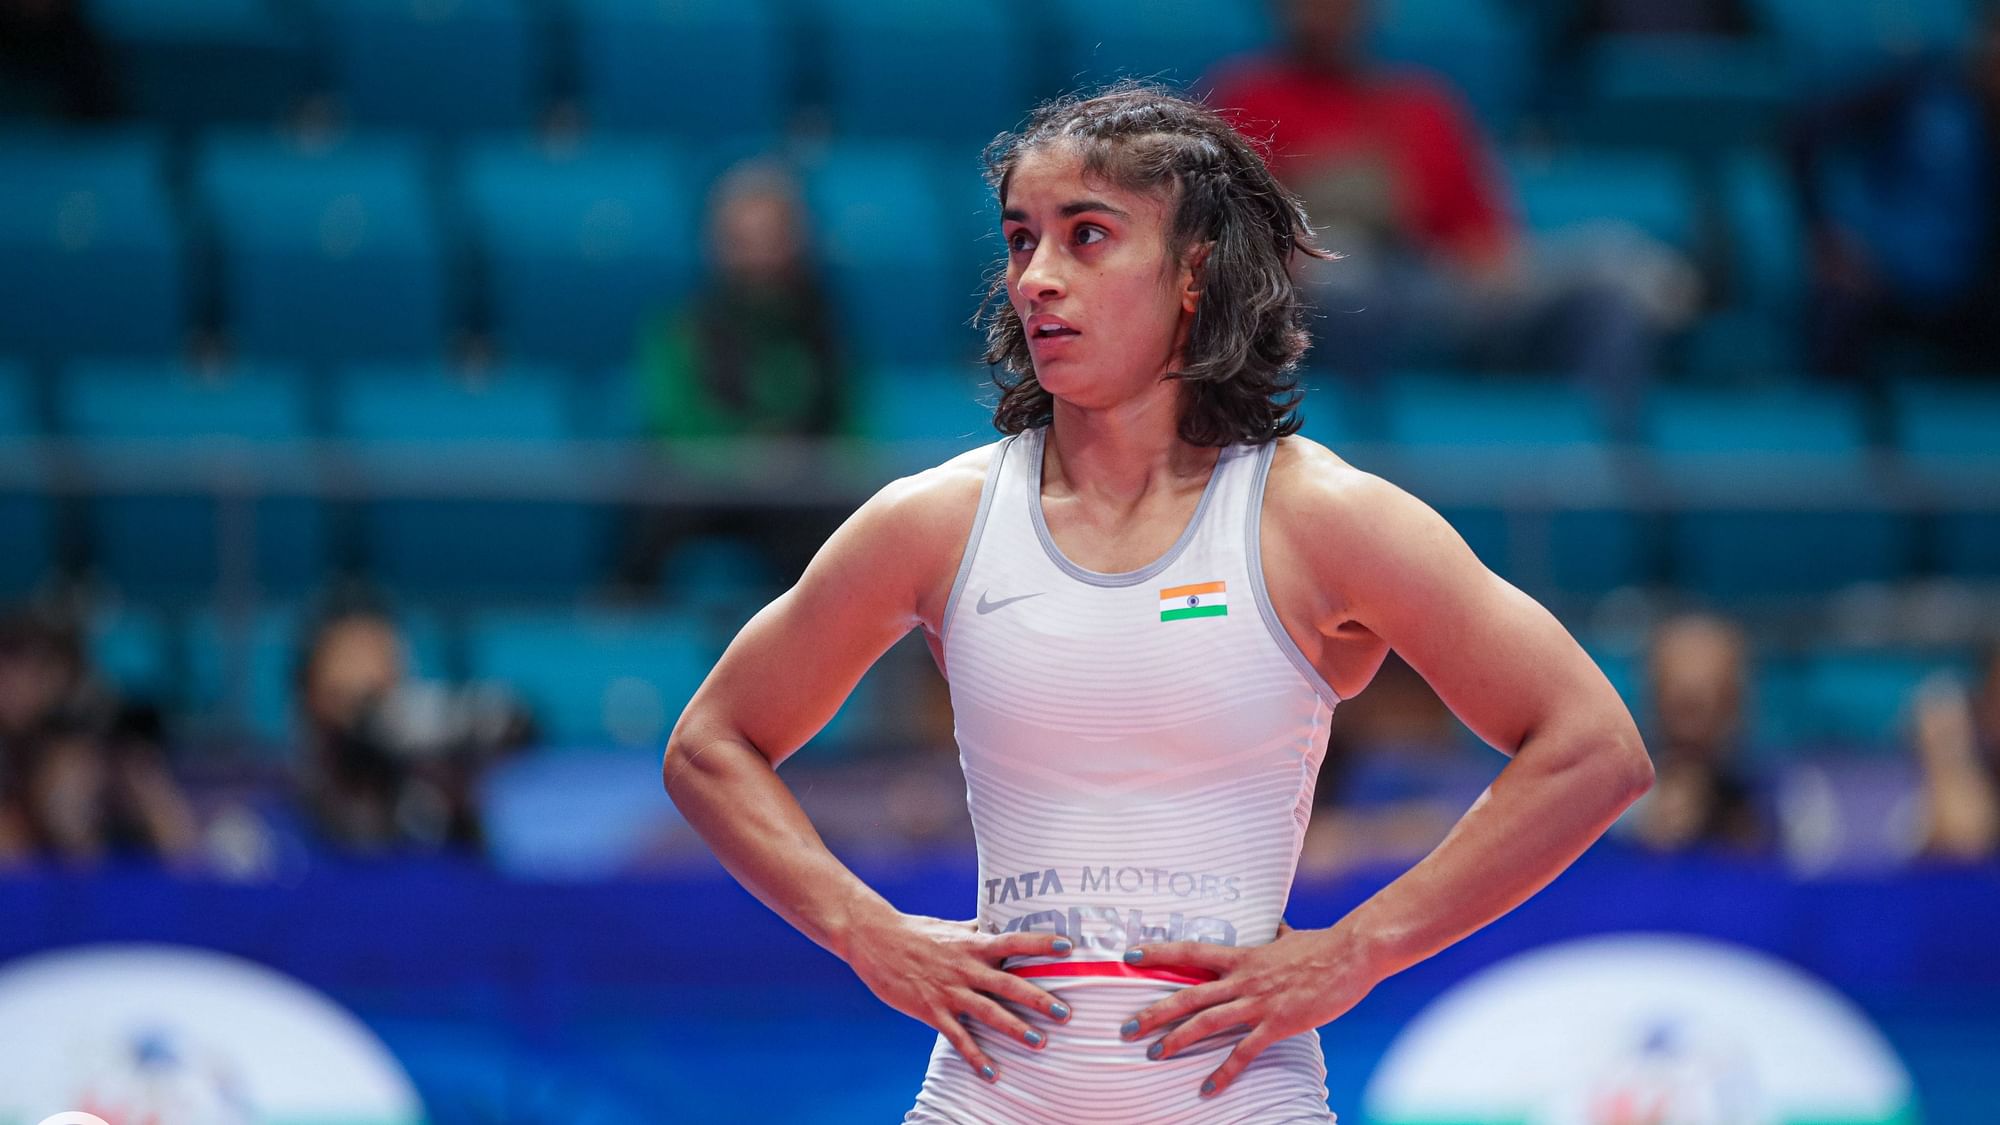 Vinesh Phogat lost to her Japanese rival Mayu Mukaida in the quarter final of the women’s 53 kg category at the Asian Wrestling Championships.